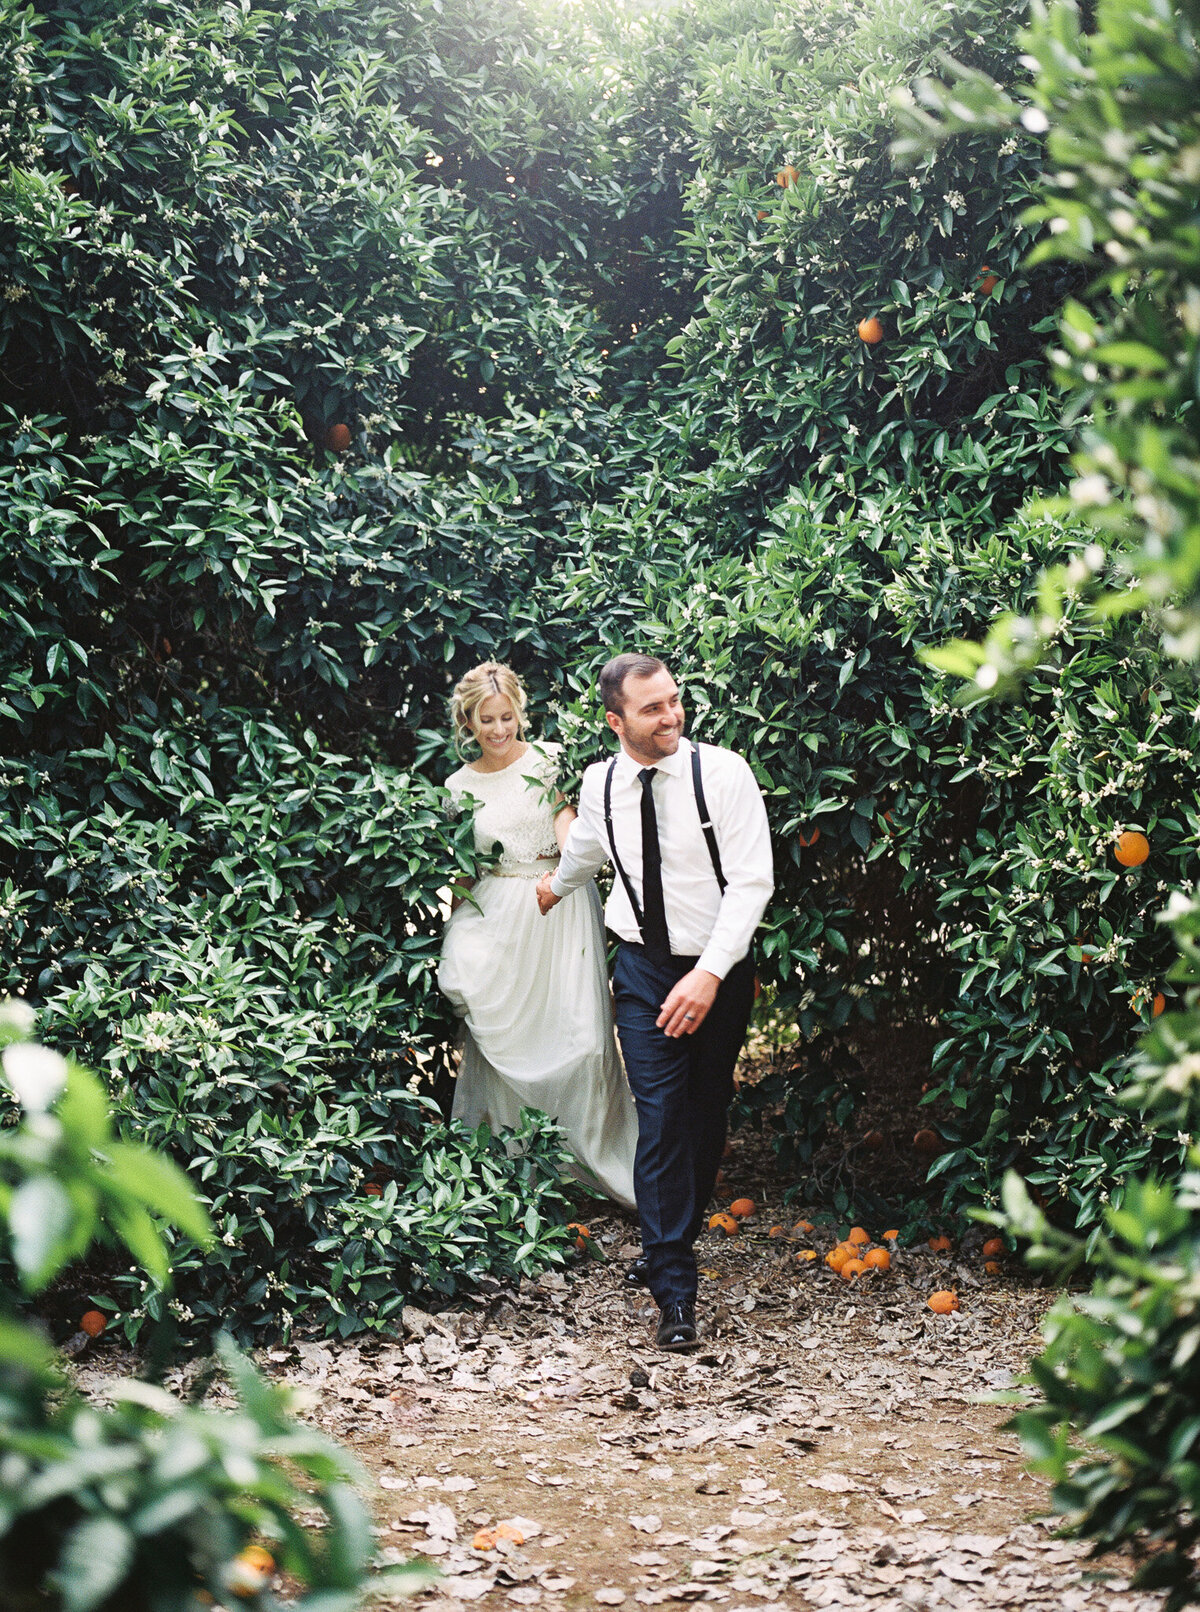 styled shoots across America